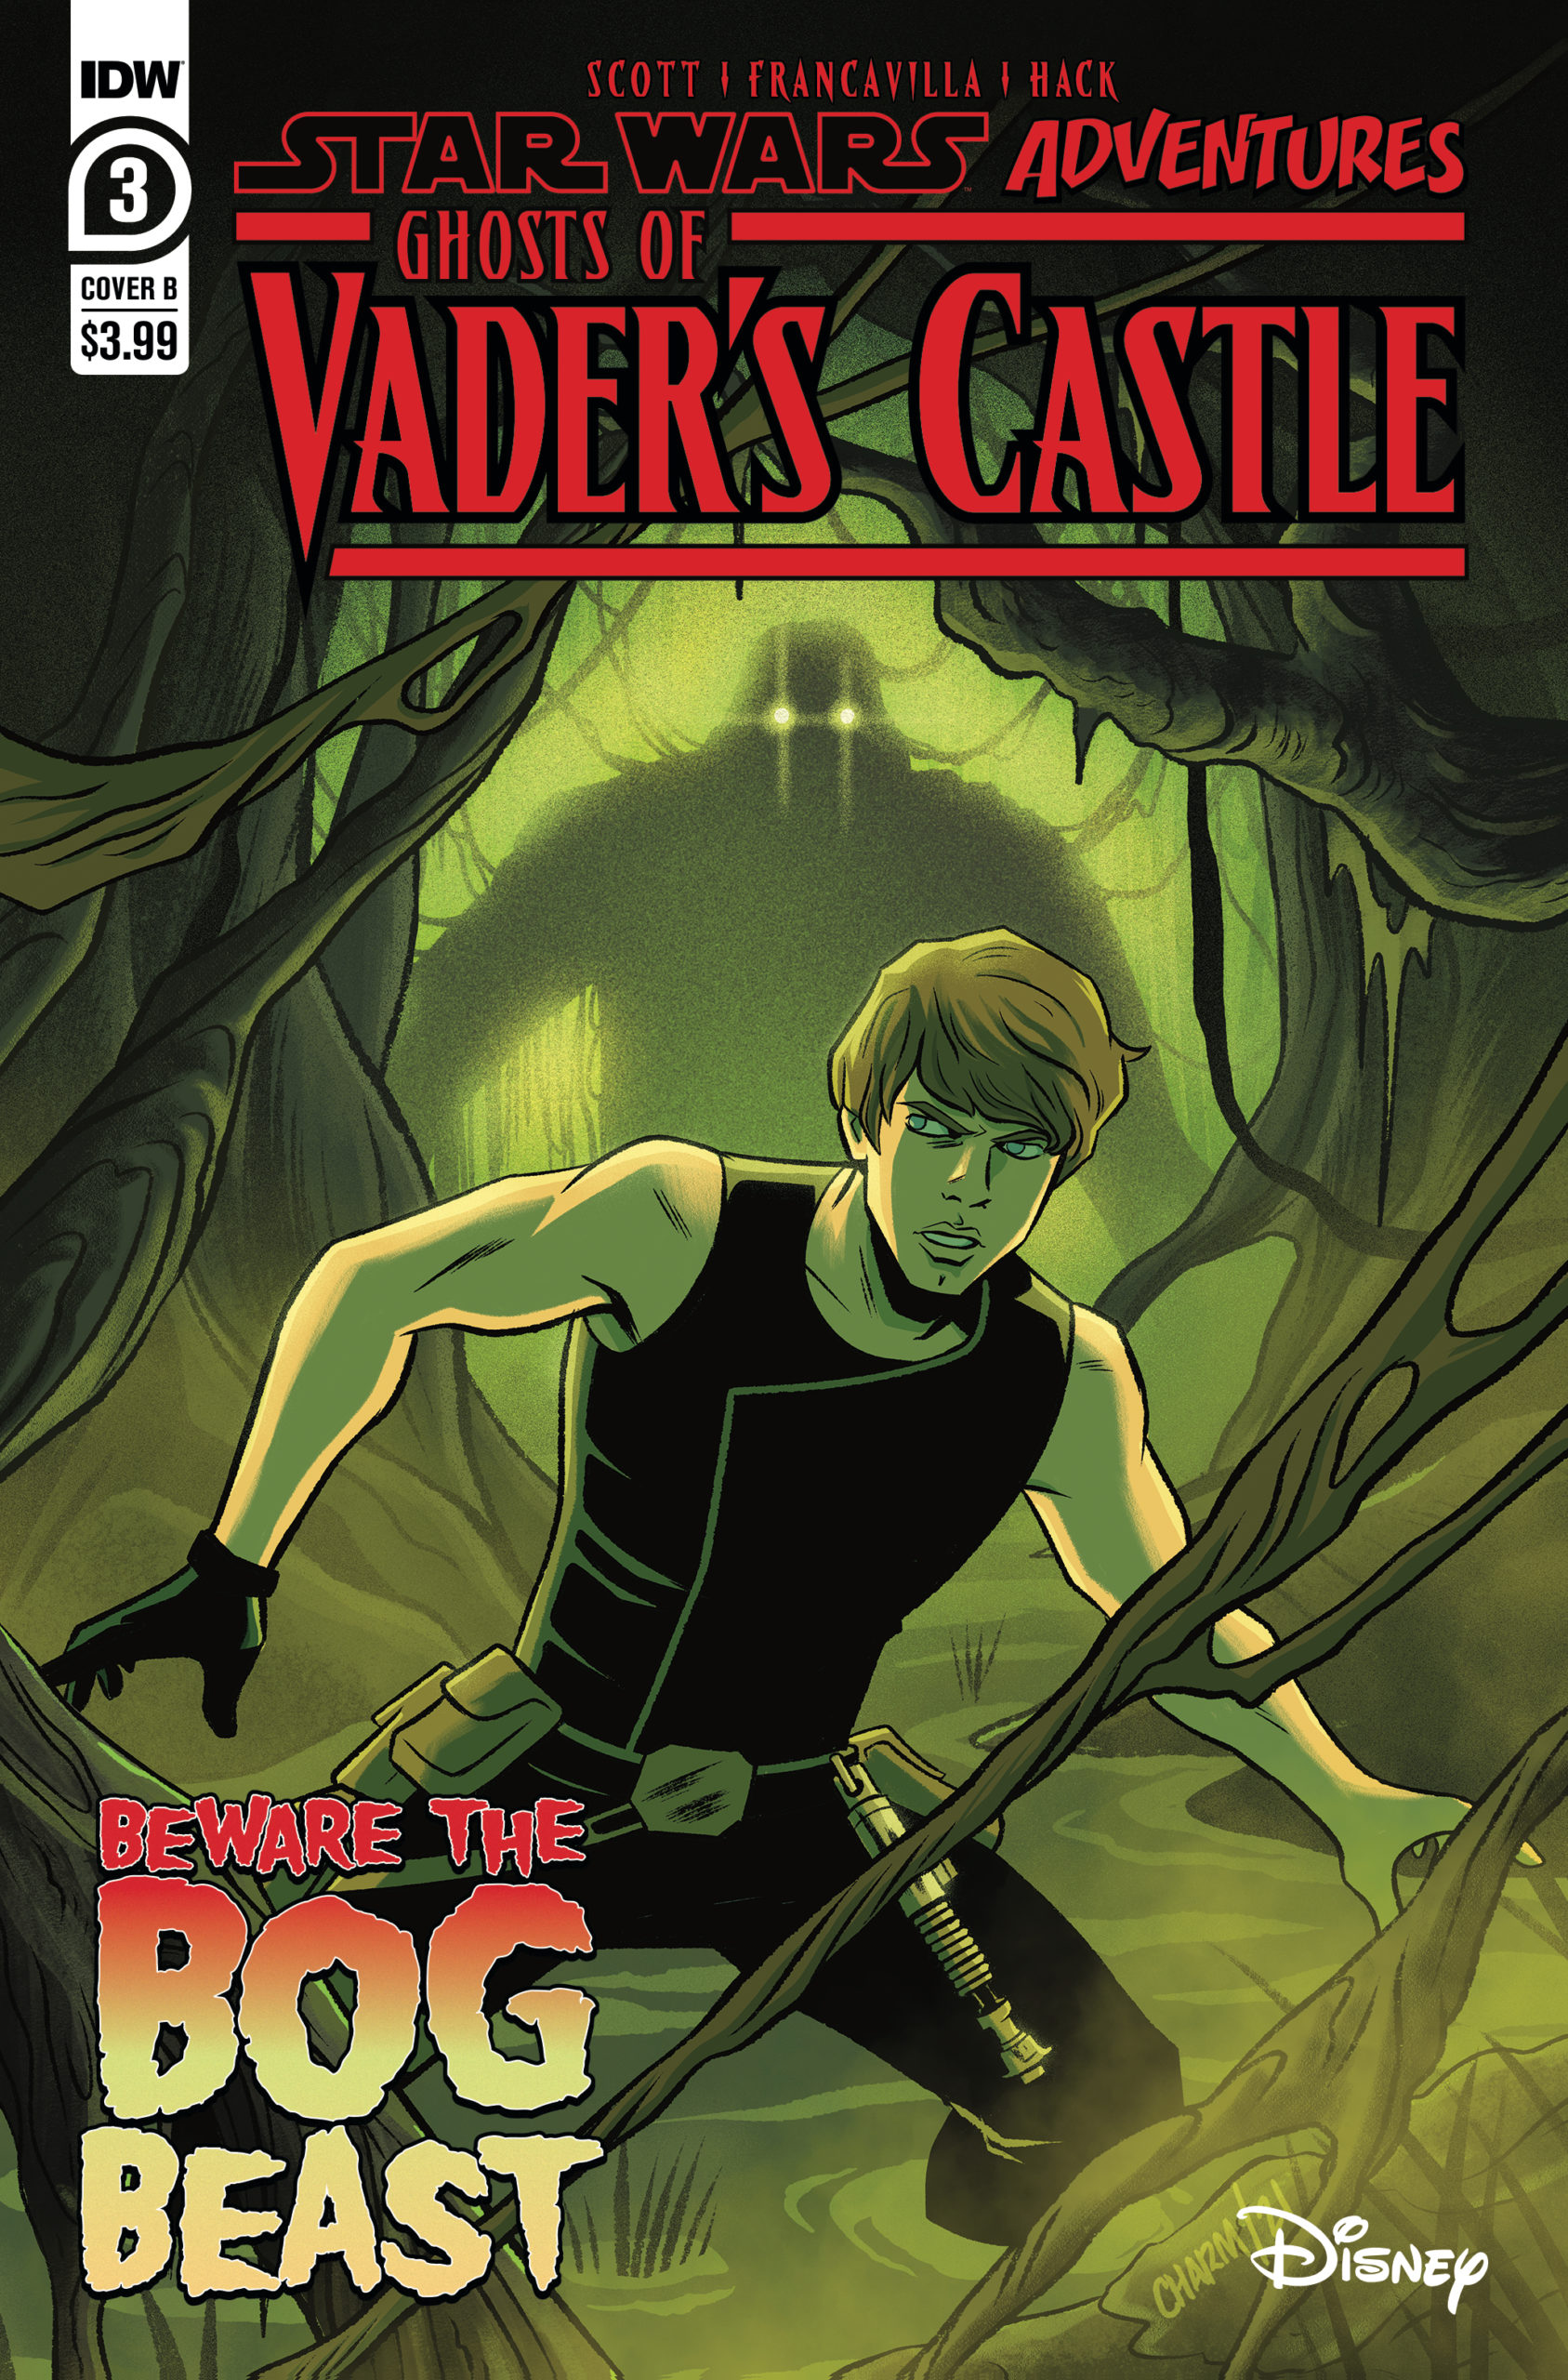 Ghosts of Vader's Castle #3 (Cover B by Derek Charm) (06.10.2021)